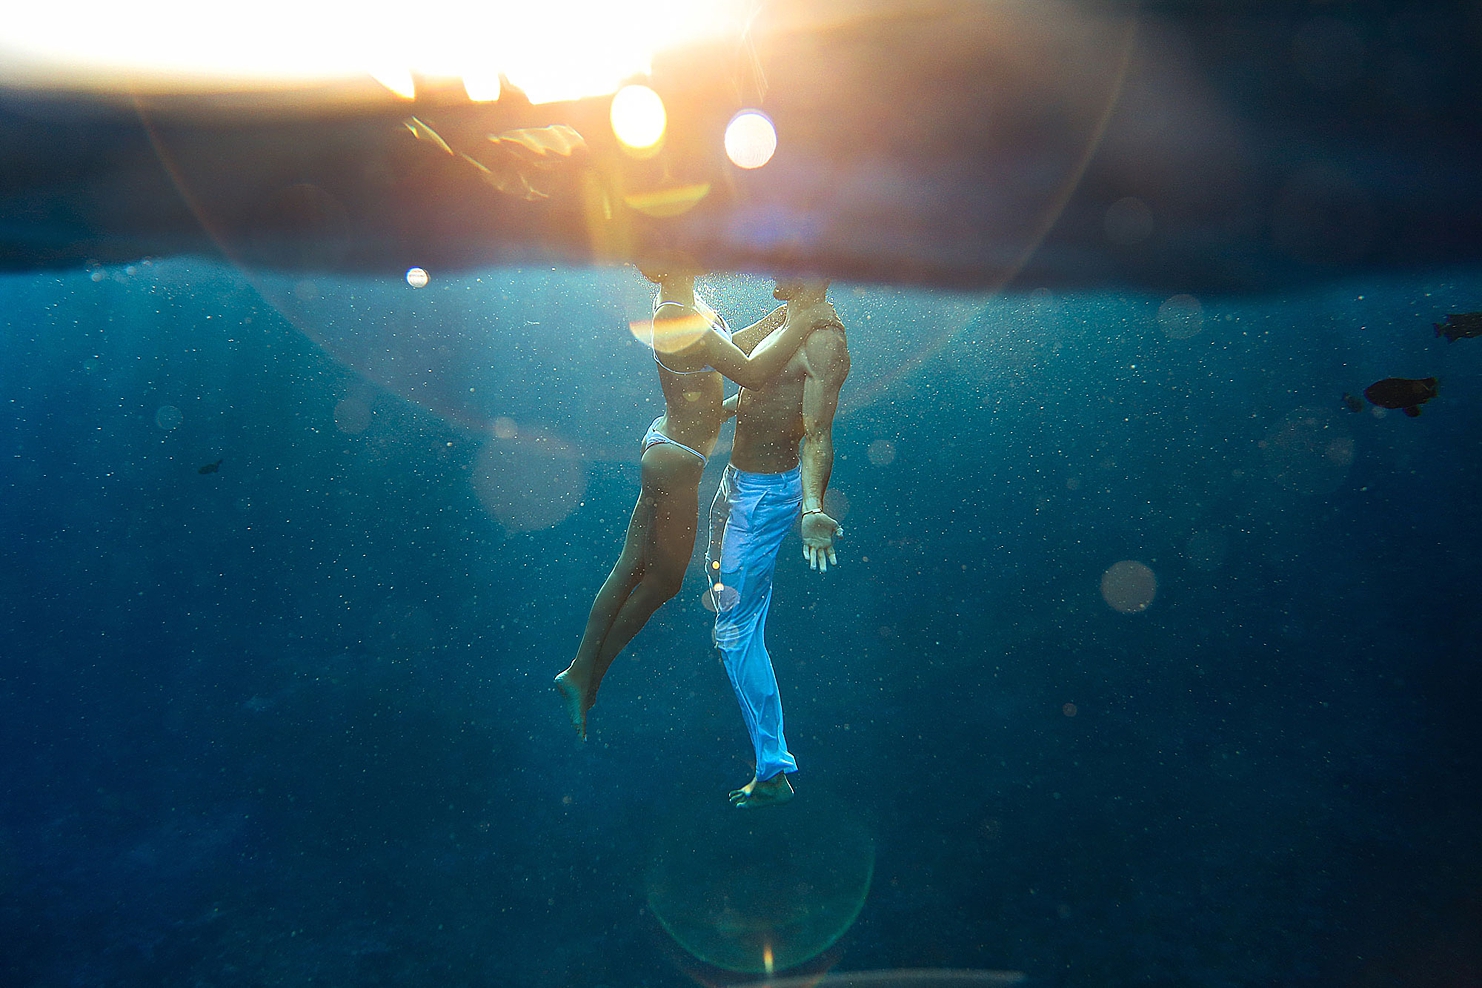 hawaii beach photoshoot ideas of underwater portrait of couple with arms outstretched and golden light filtering from above the surface